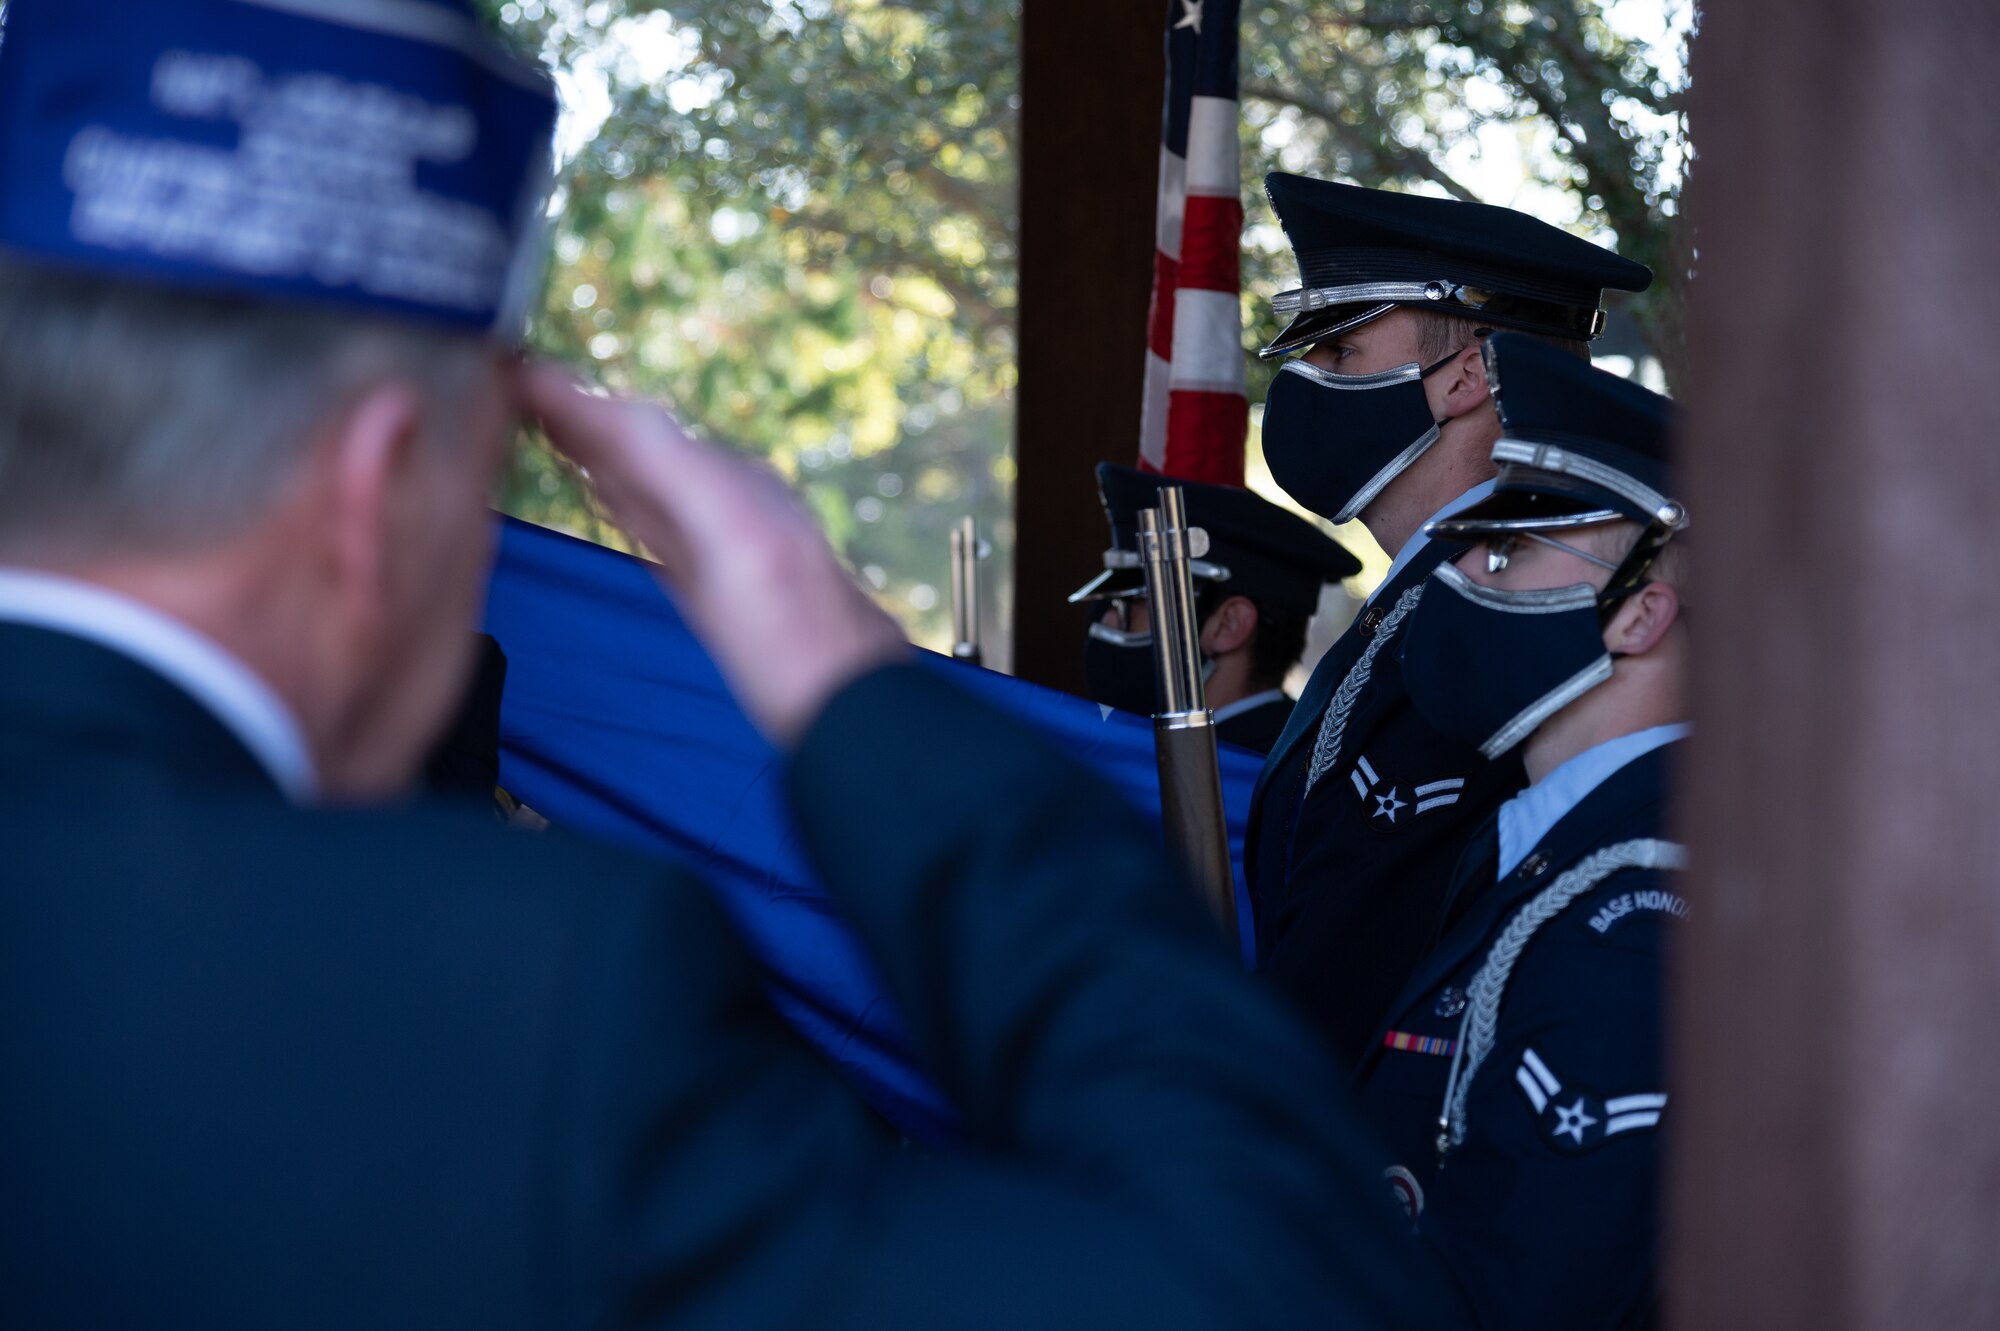 Barksdale Airmen, local community leaders and retired veterans gather at Green Wood Cemetery for the National Wreaths Across America ceremony in Bossier City, Louisiana, Dec. 19, 2021.